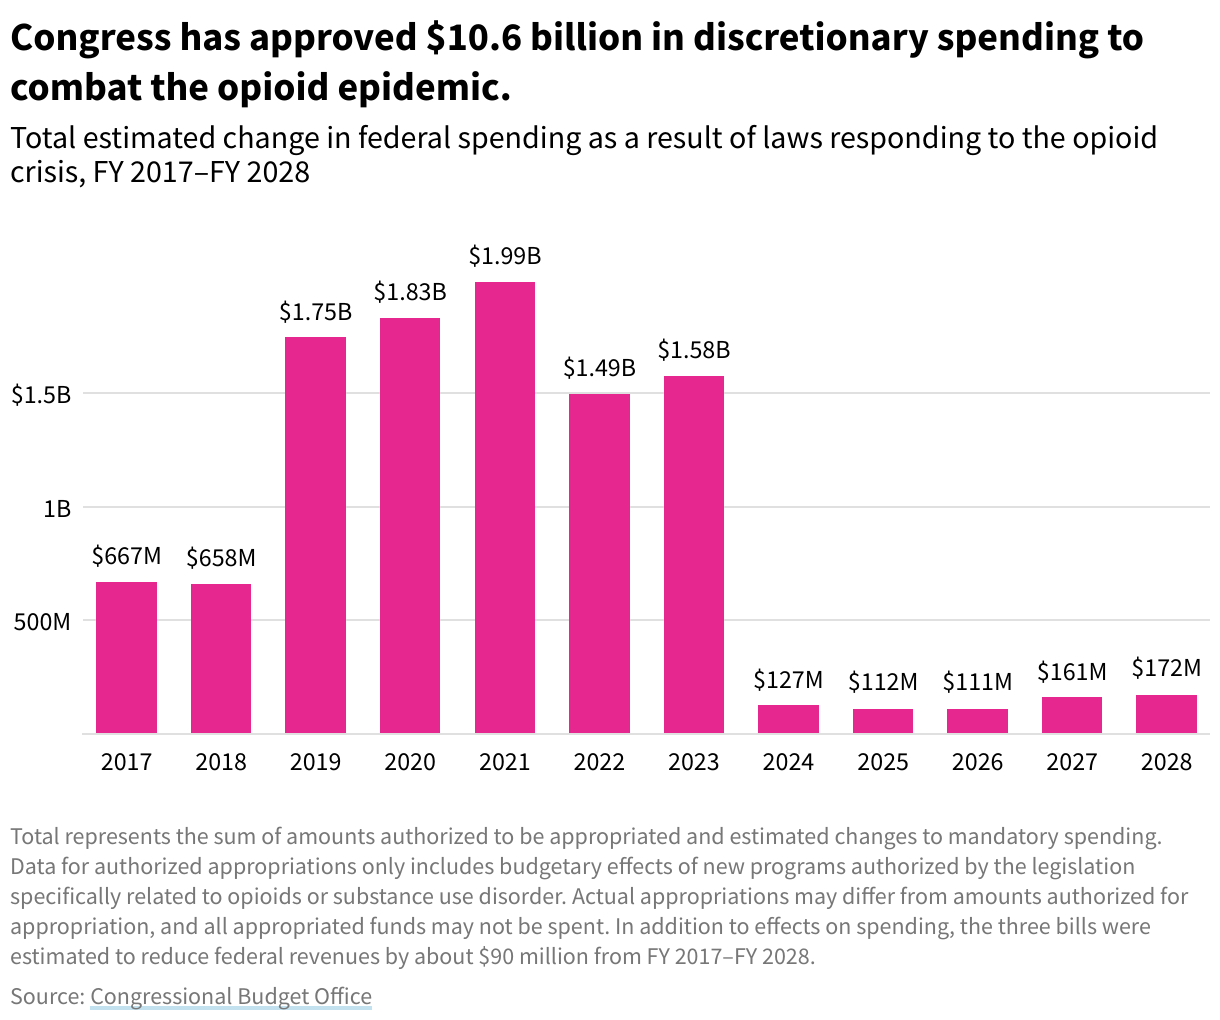 Bar chart of the total estimated change in federal spending as a result of laws responding to the opioid crisis from FY 2017 to FY 2028.